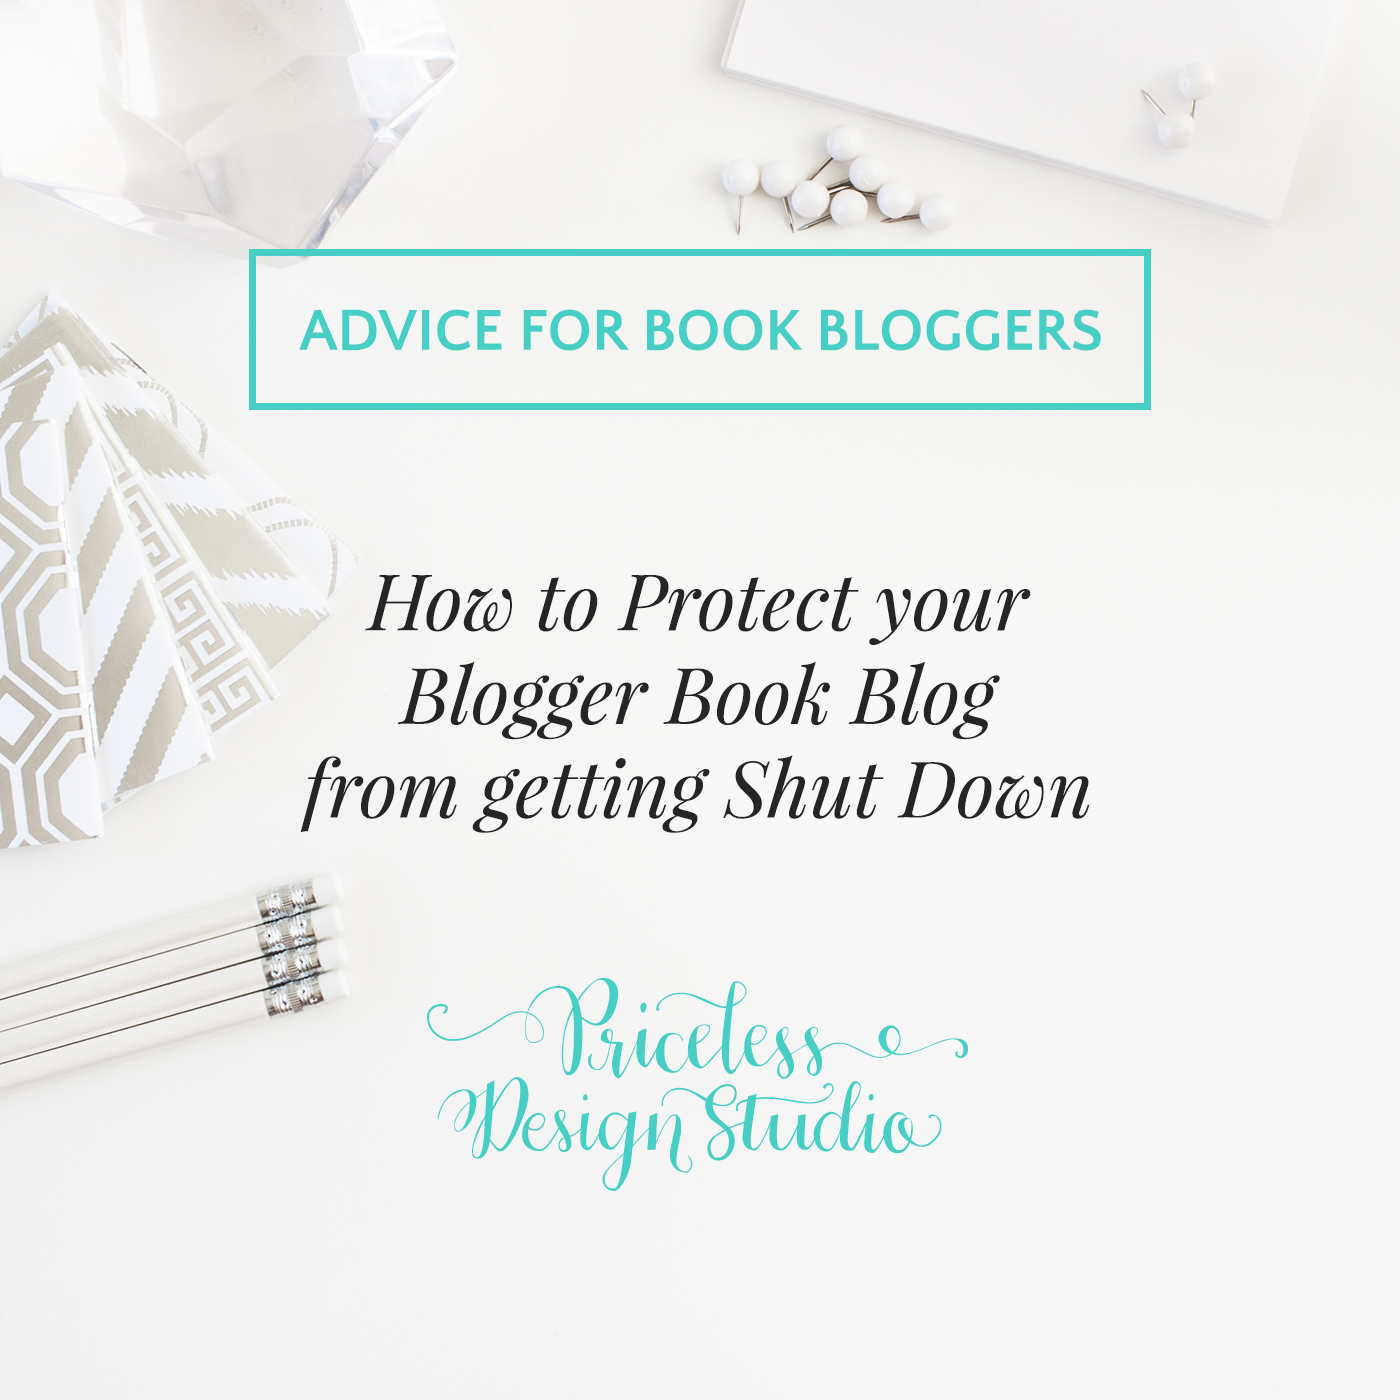 How to Protect your Blogger Book Blog from getting Shut Down